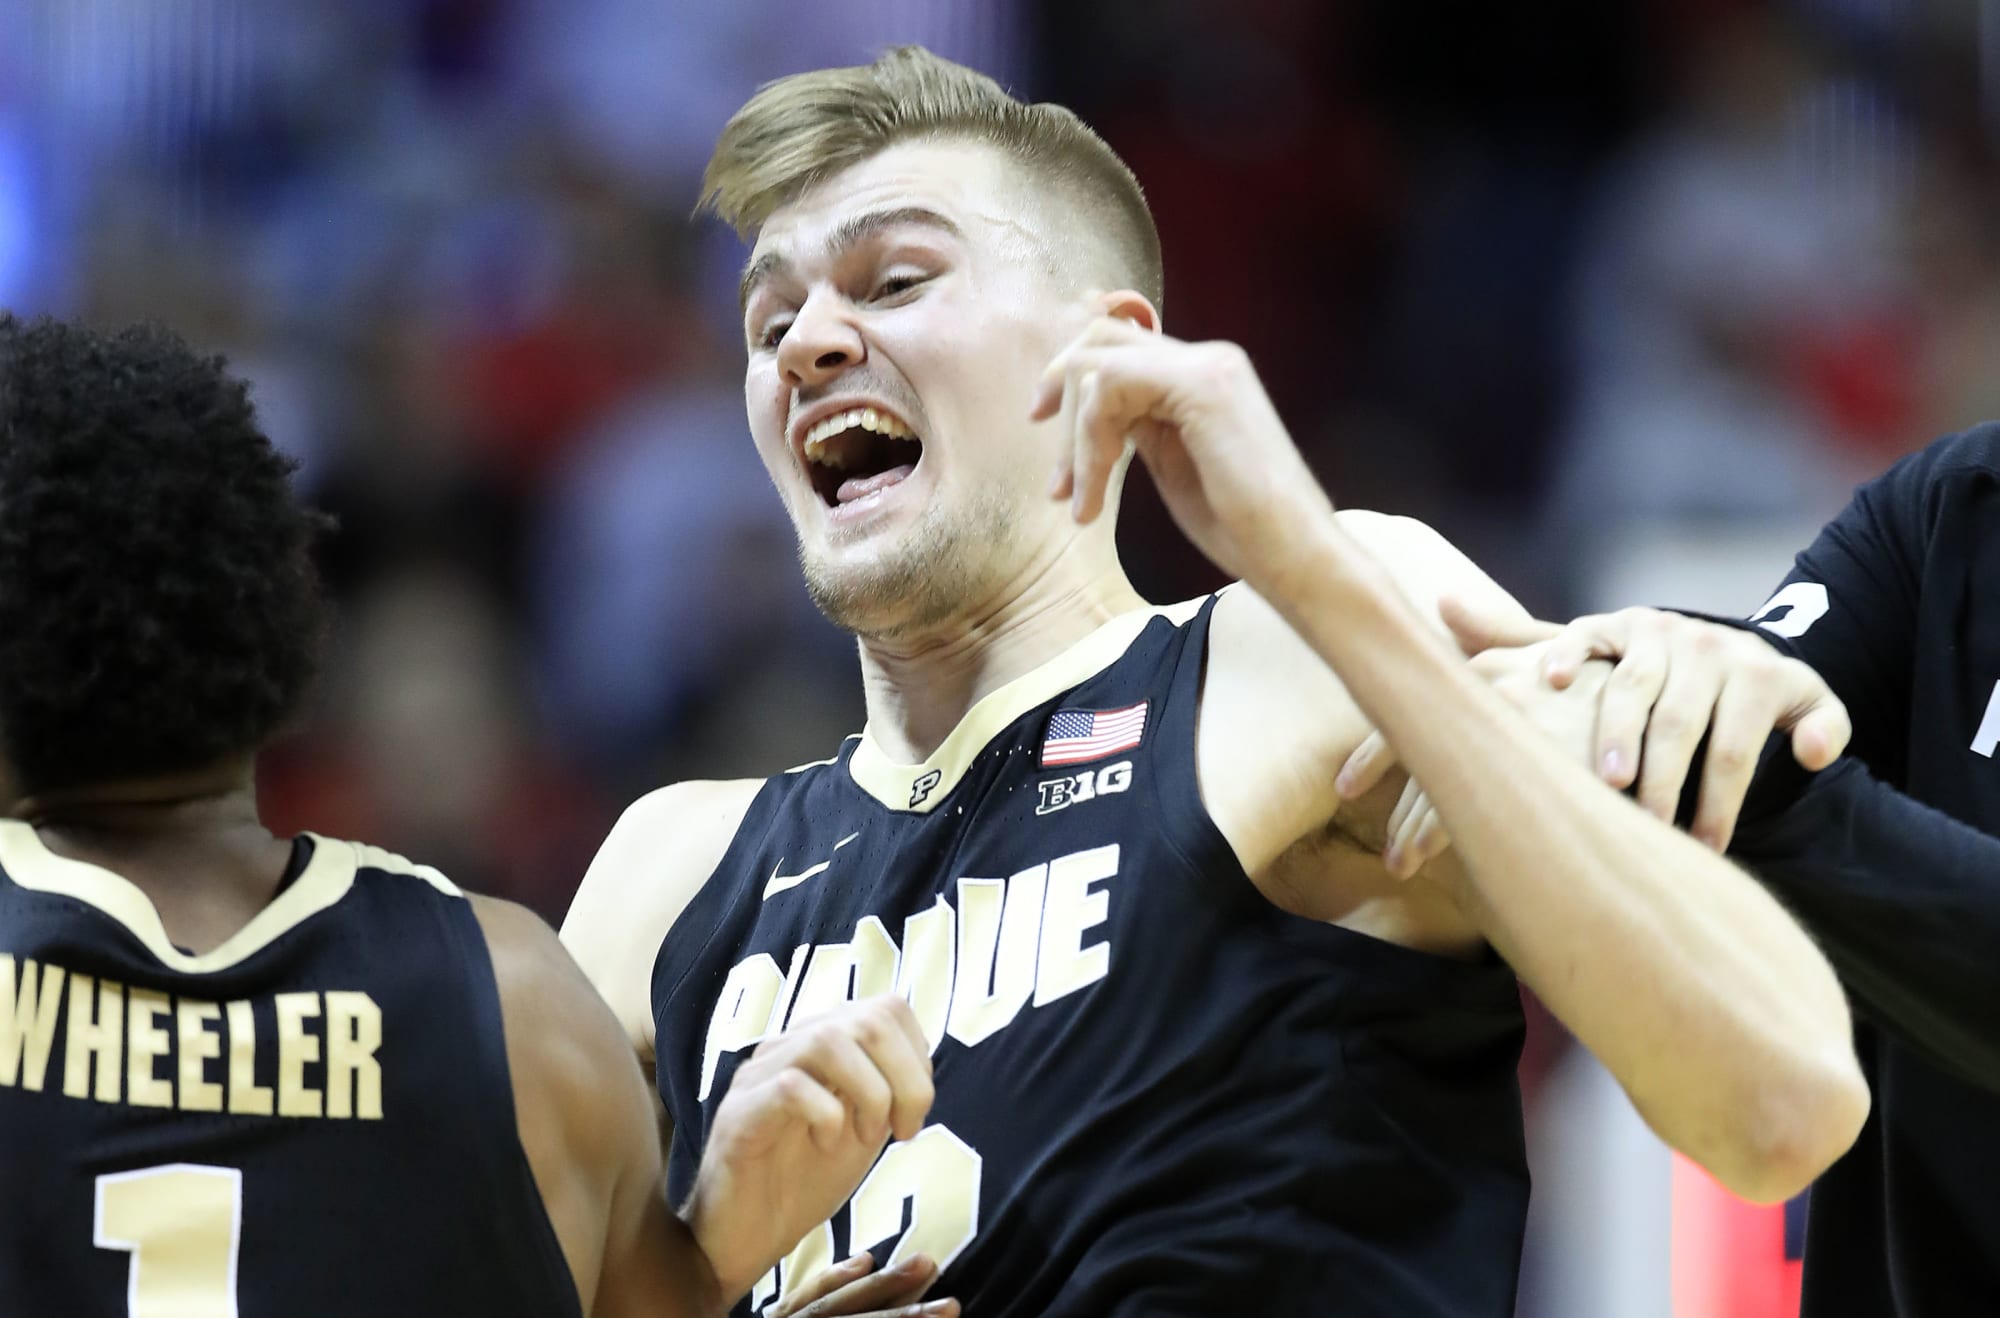 March Madness 2019 Buy or Sell Texas Tech, LSU, Purdue and Houston?